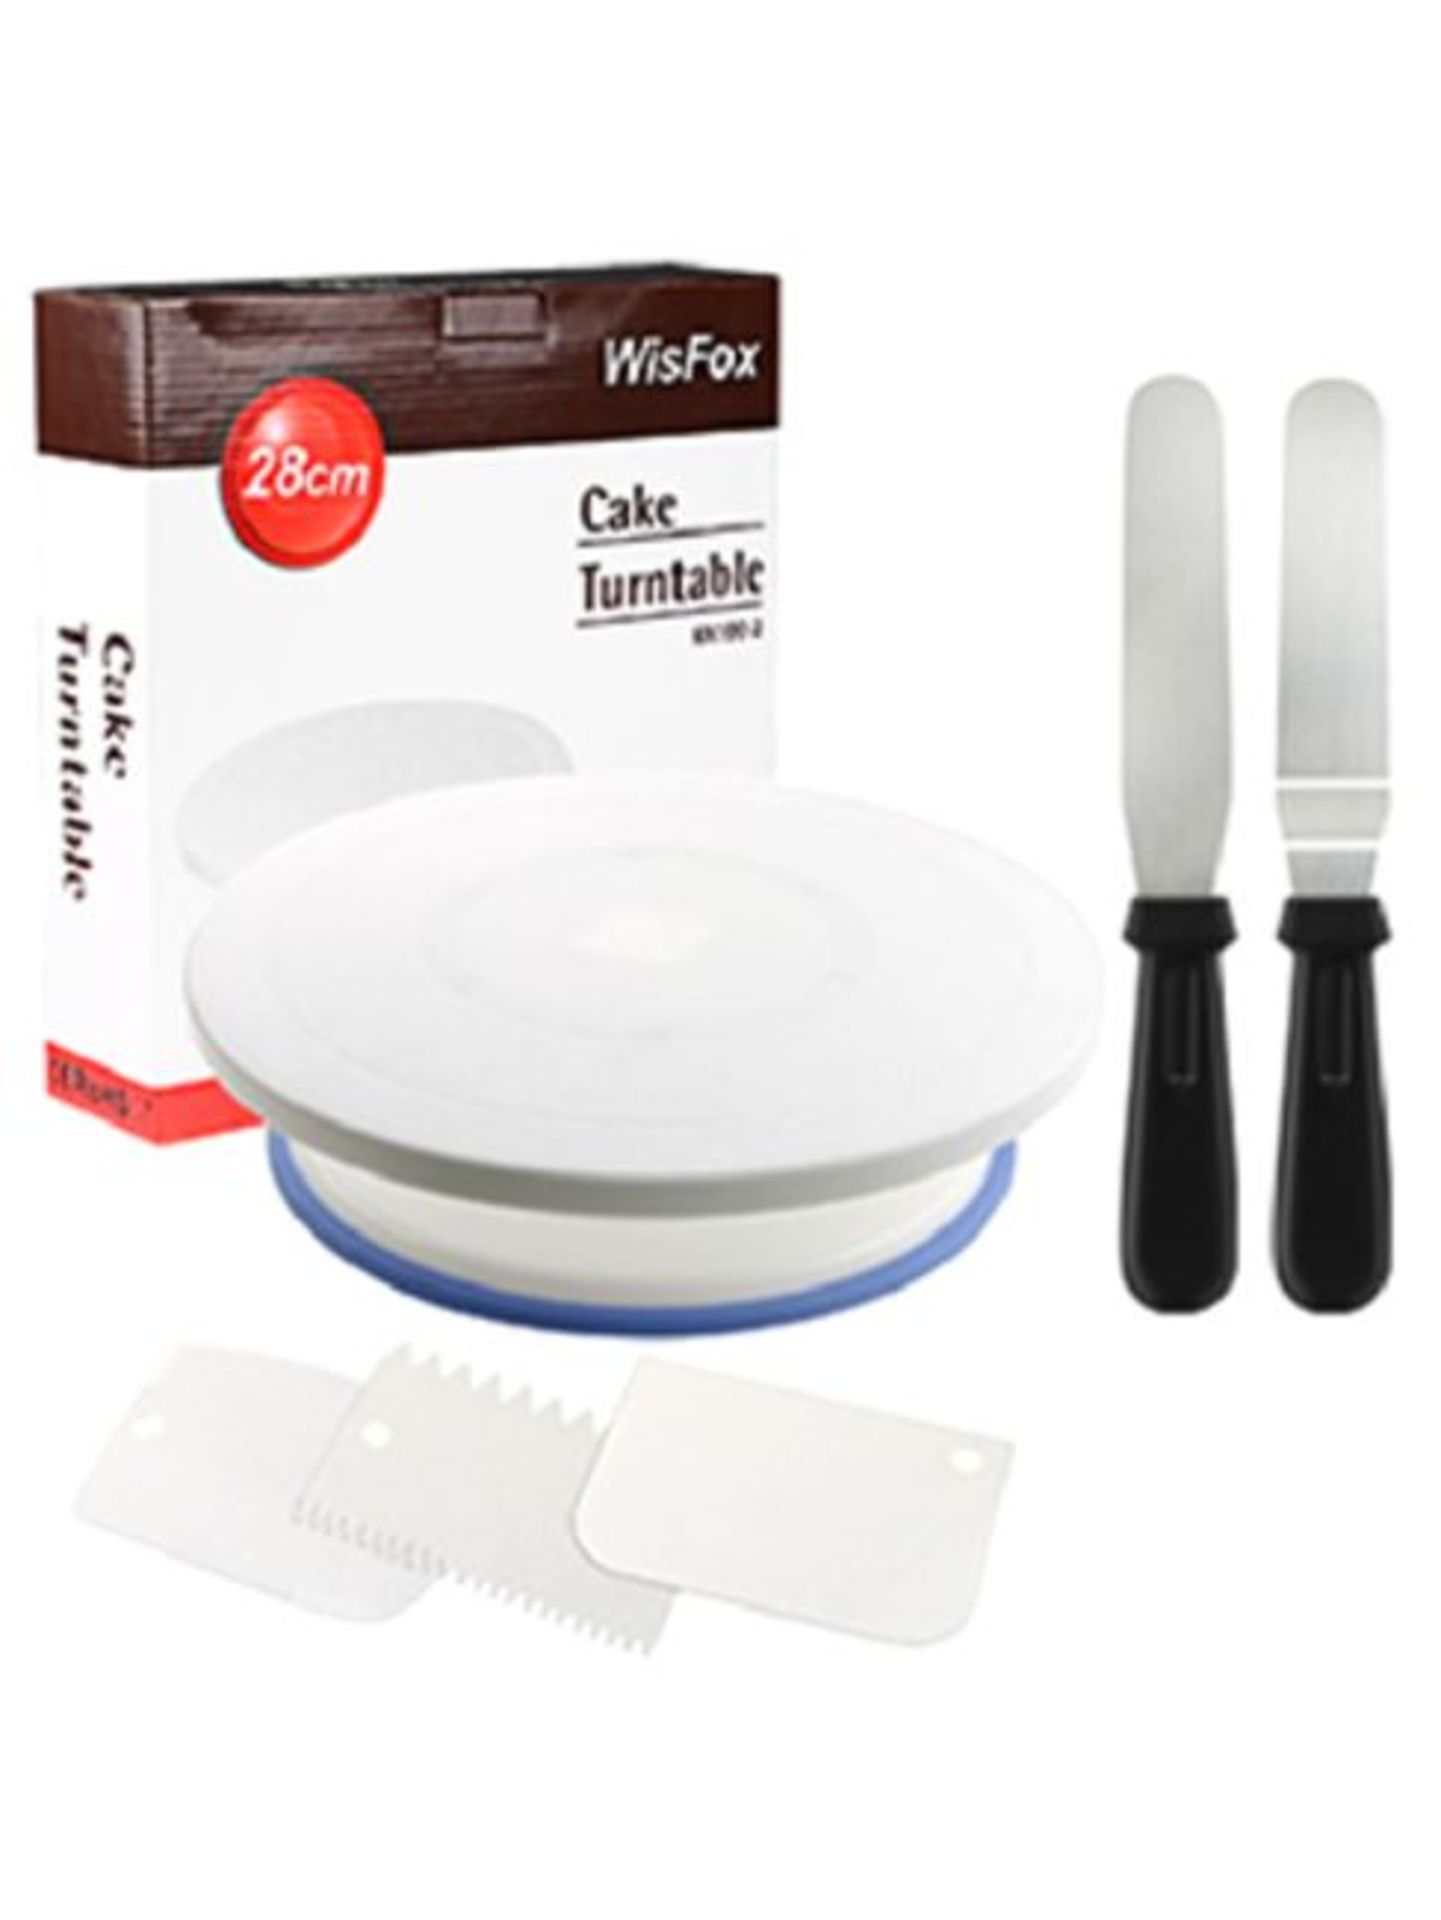 Wisfox Rotating Cake Decorating Plate With 2 Angled Palette Knife Set, Icing